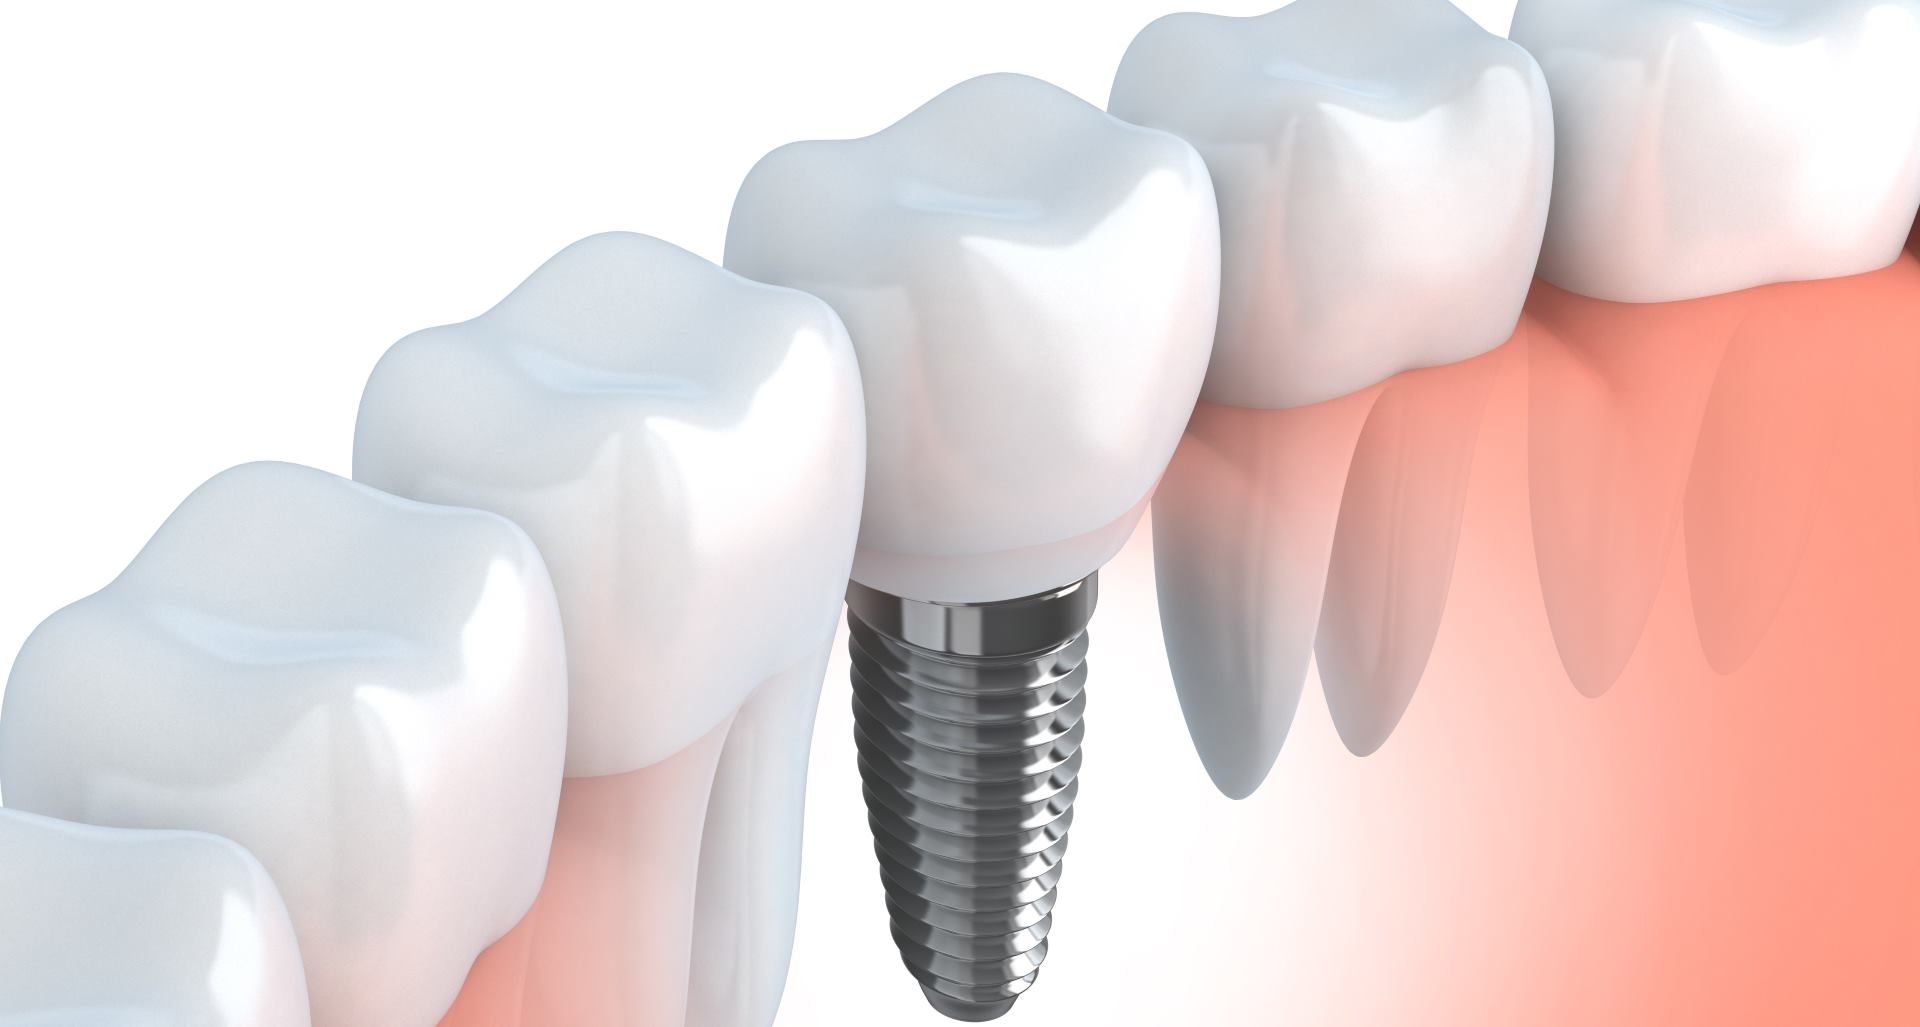 model of teeth and a dental implant